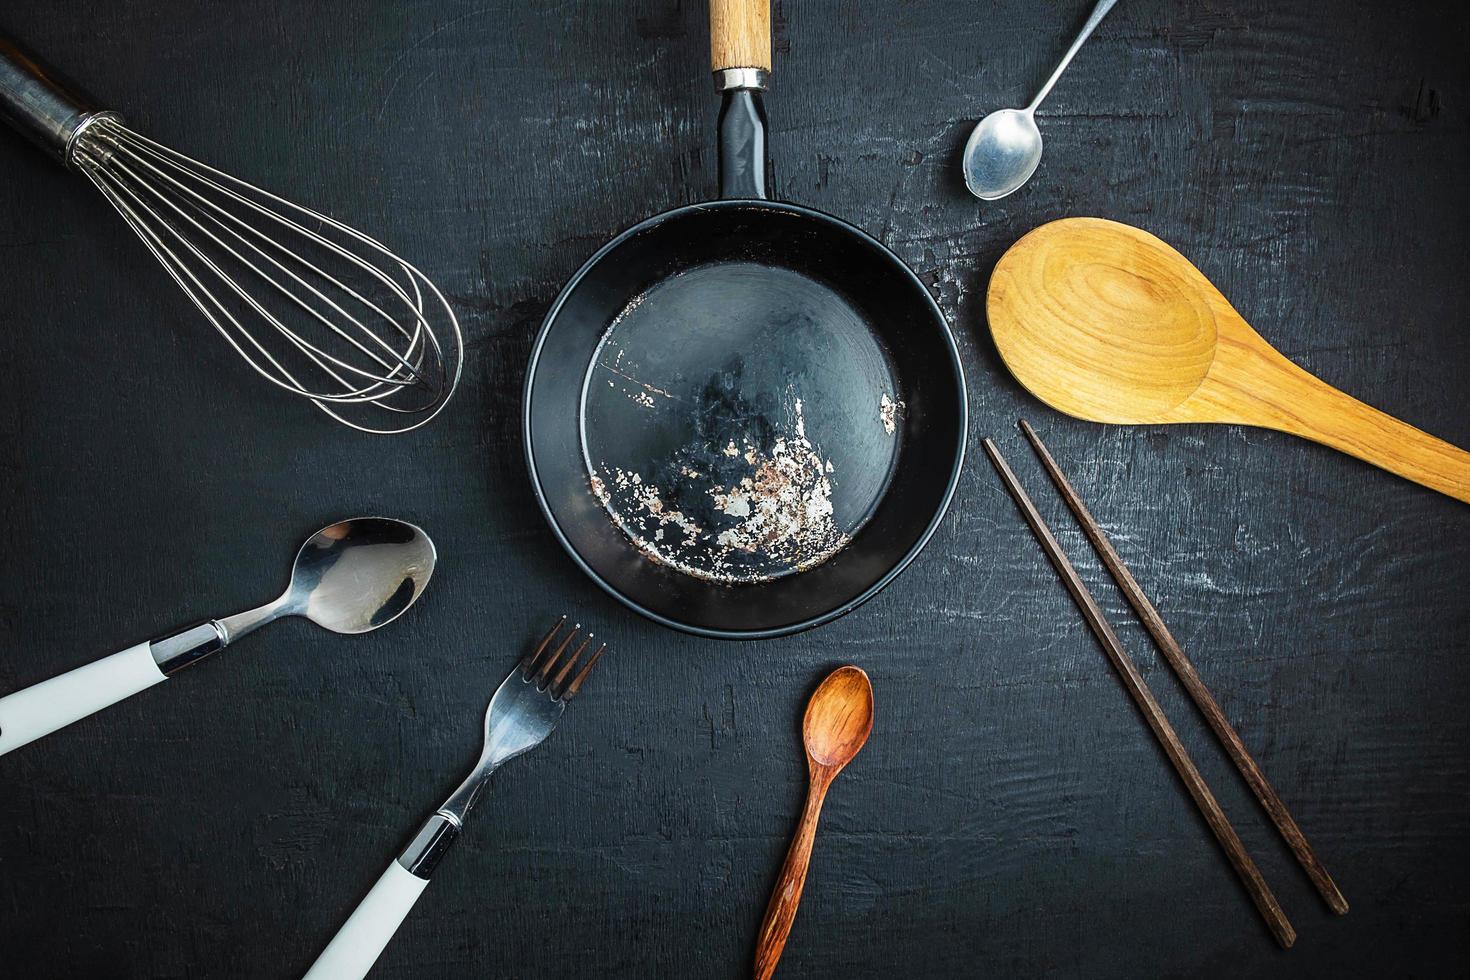 Kitchen utensils and a black frying pan on black table background photo